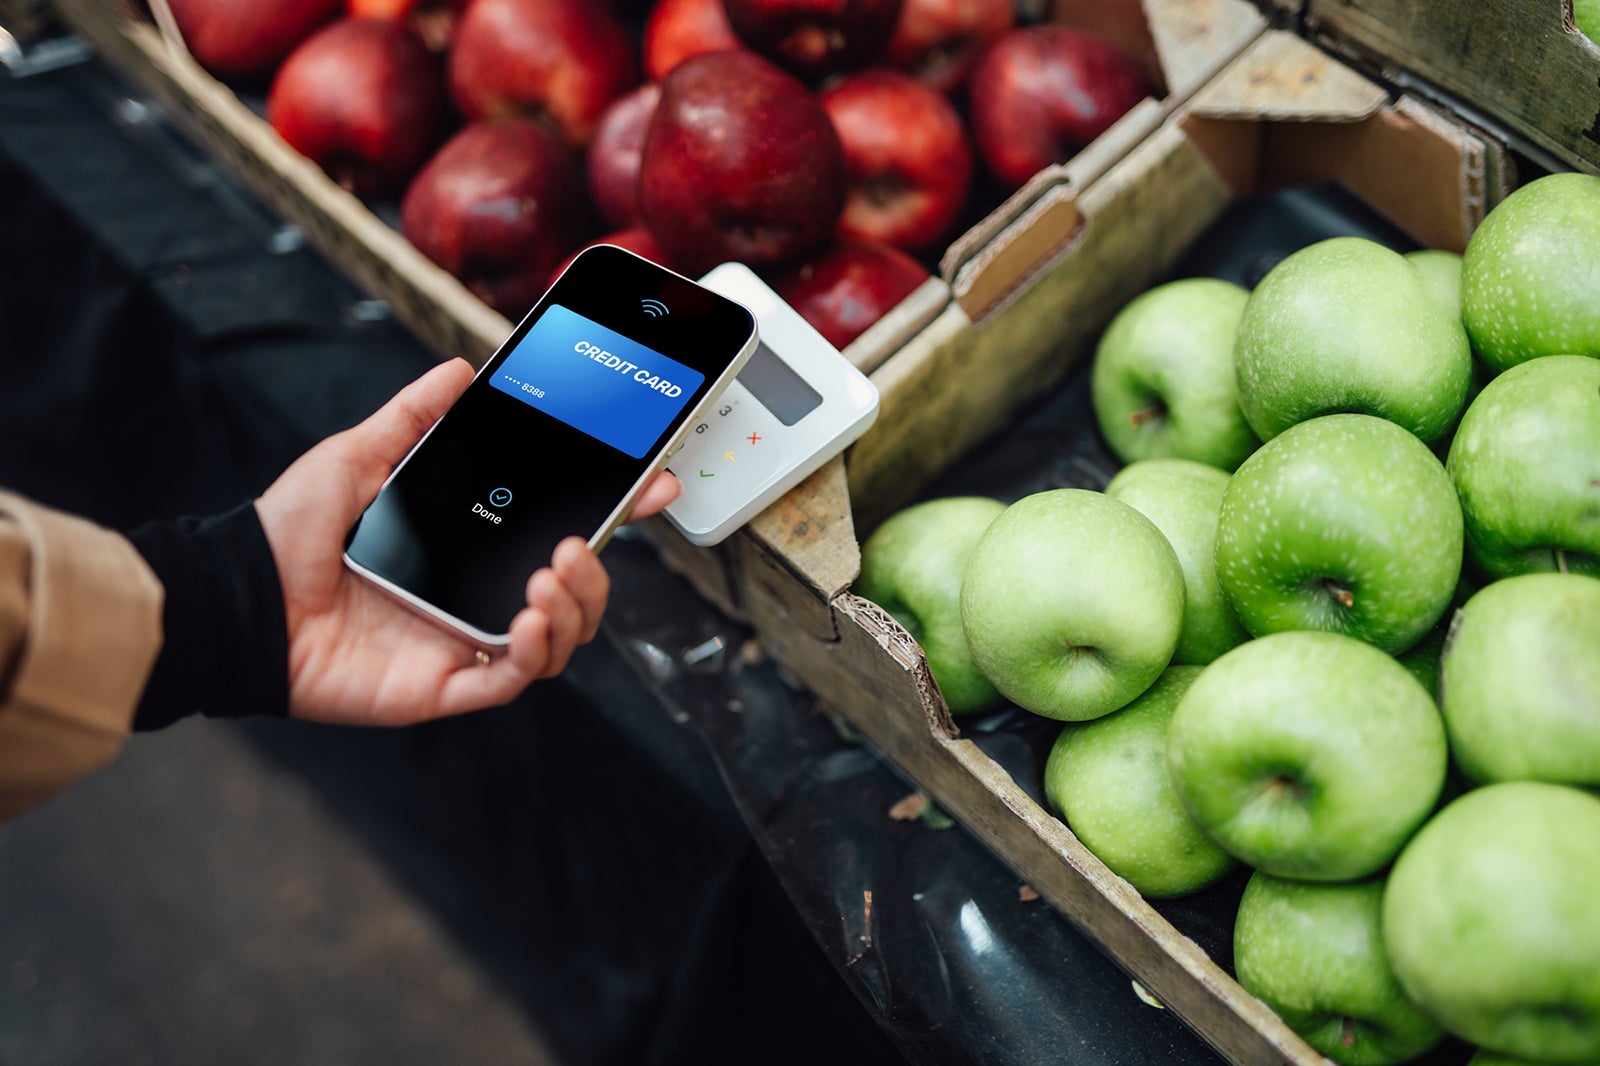 Making contactless payment with smart phone at farmers market